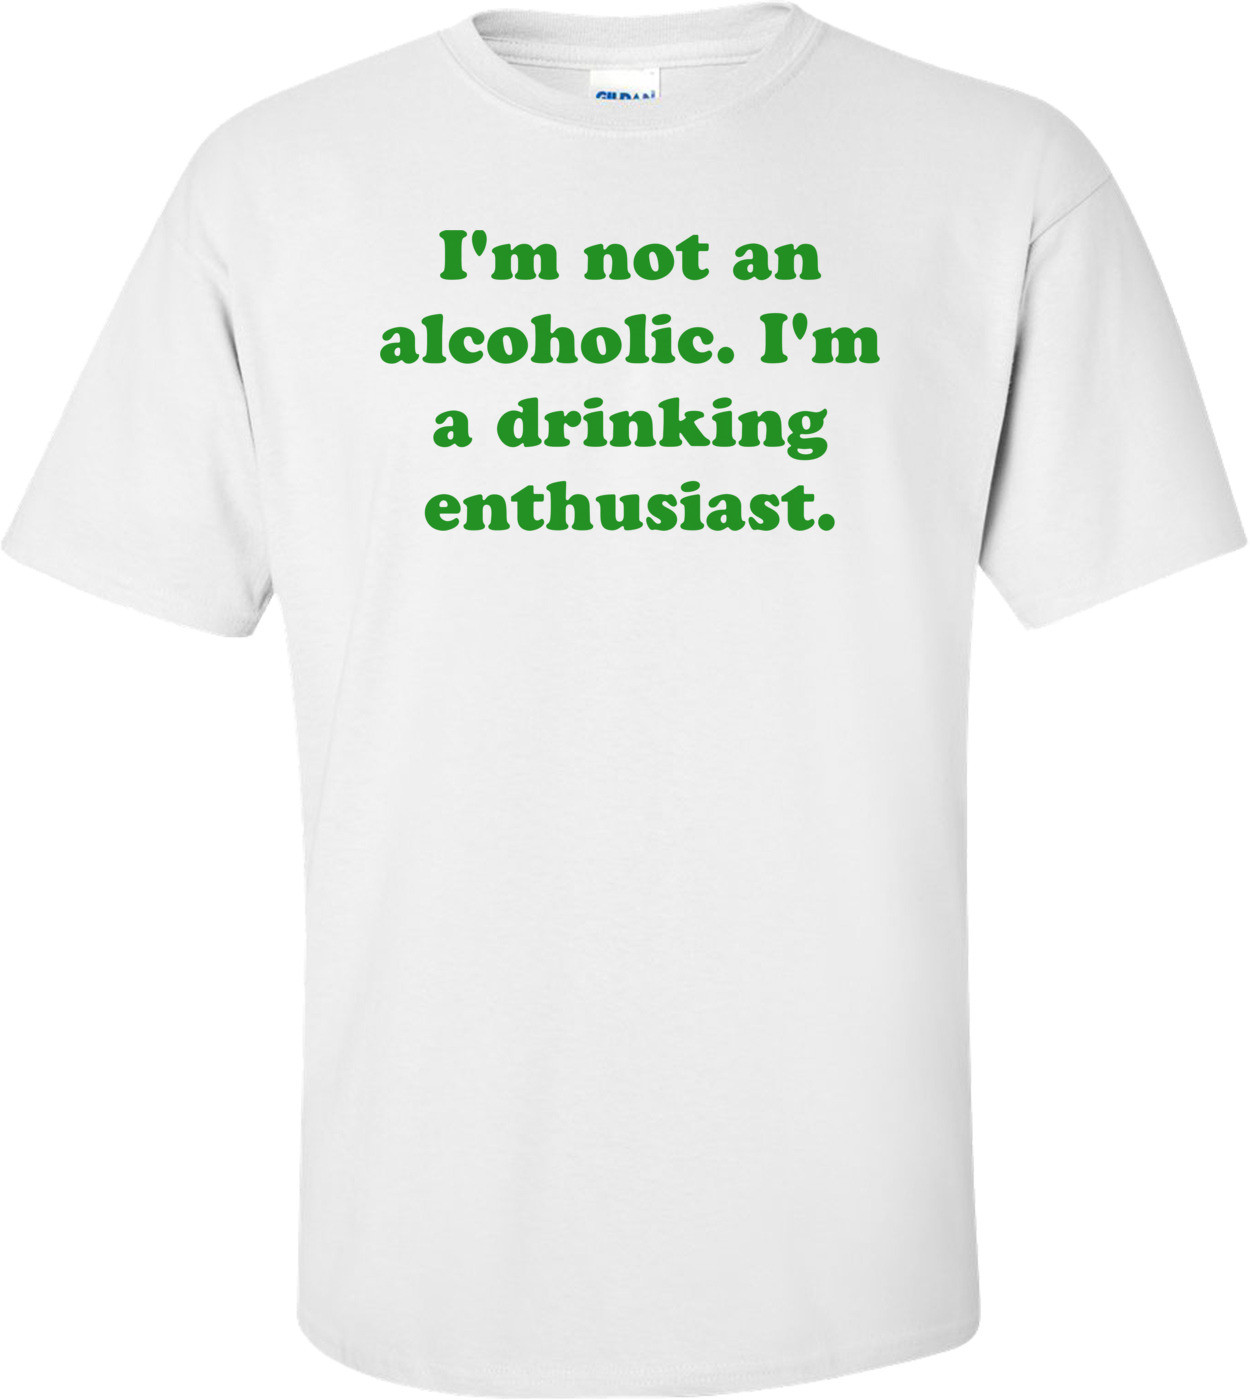 I'm not an alcoholic. I'm a drinking enthusiast.